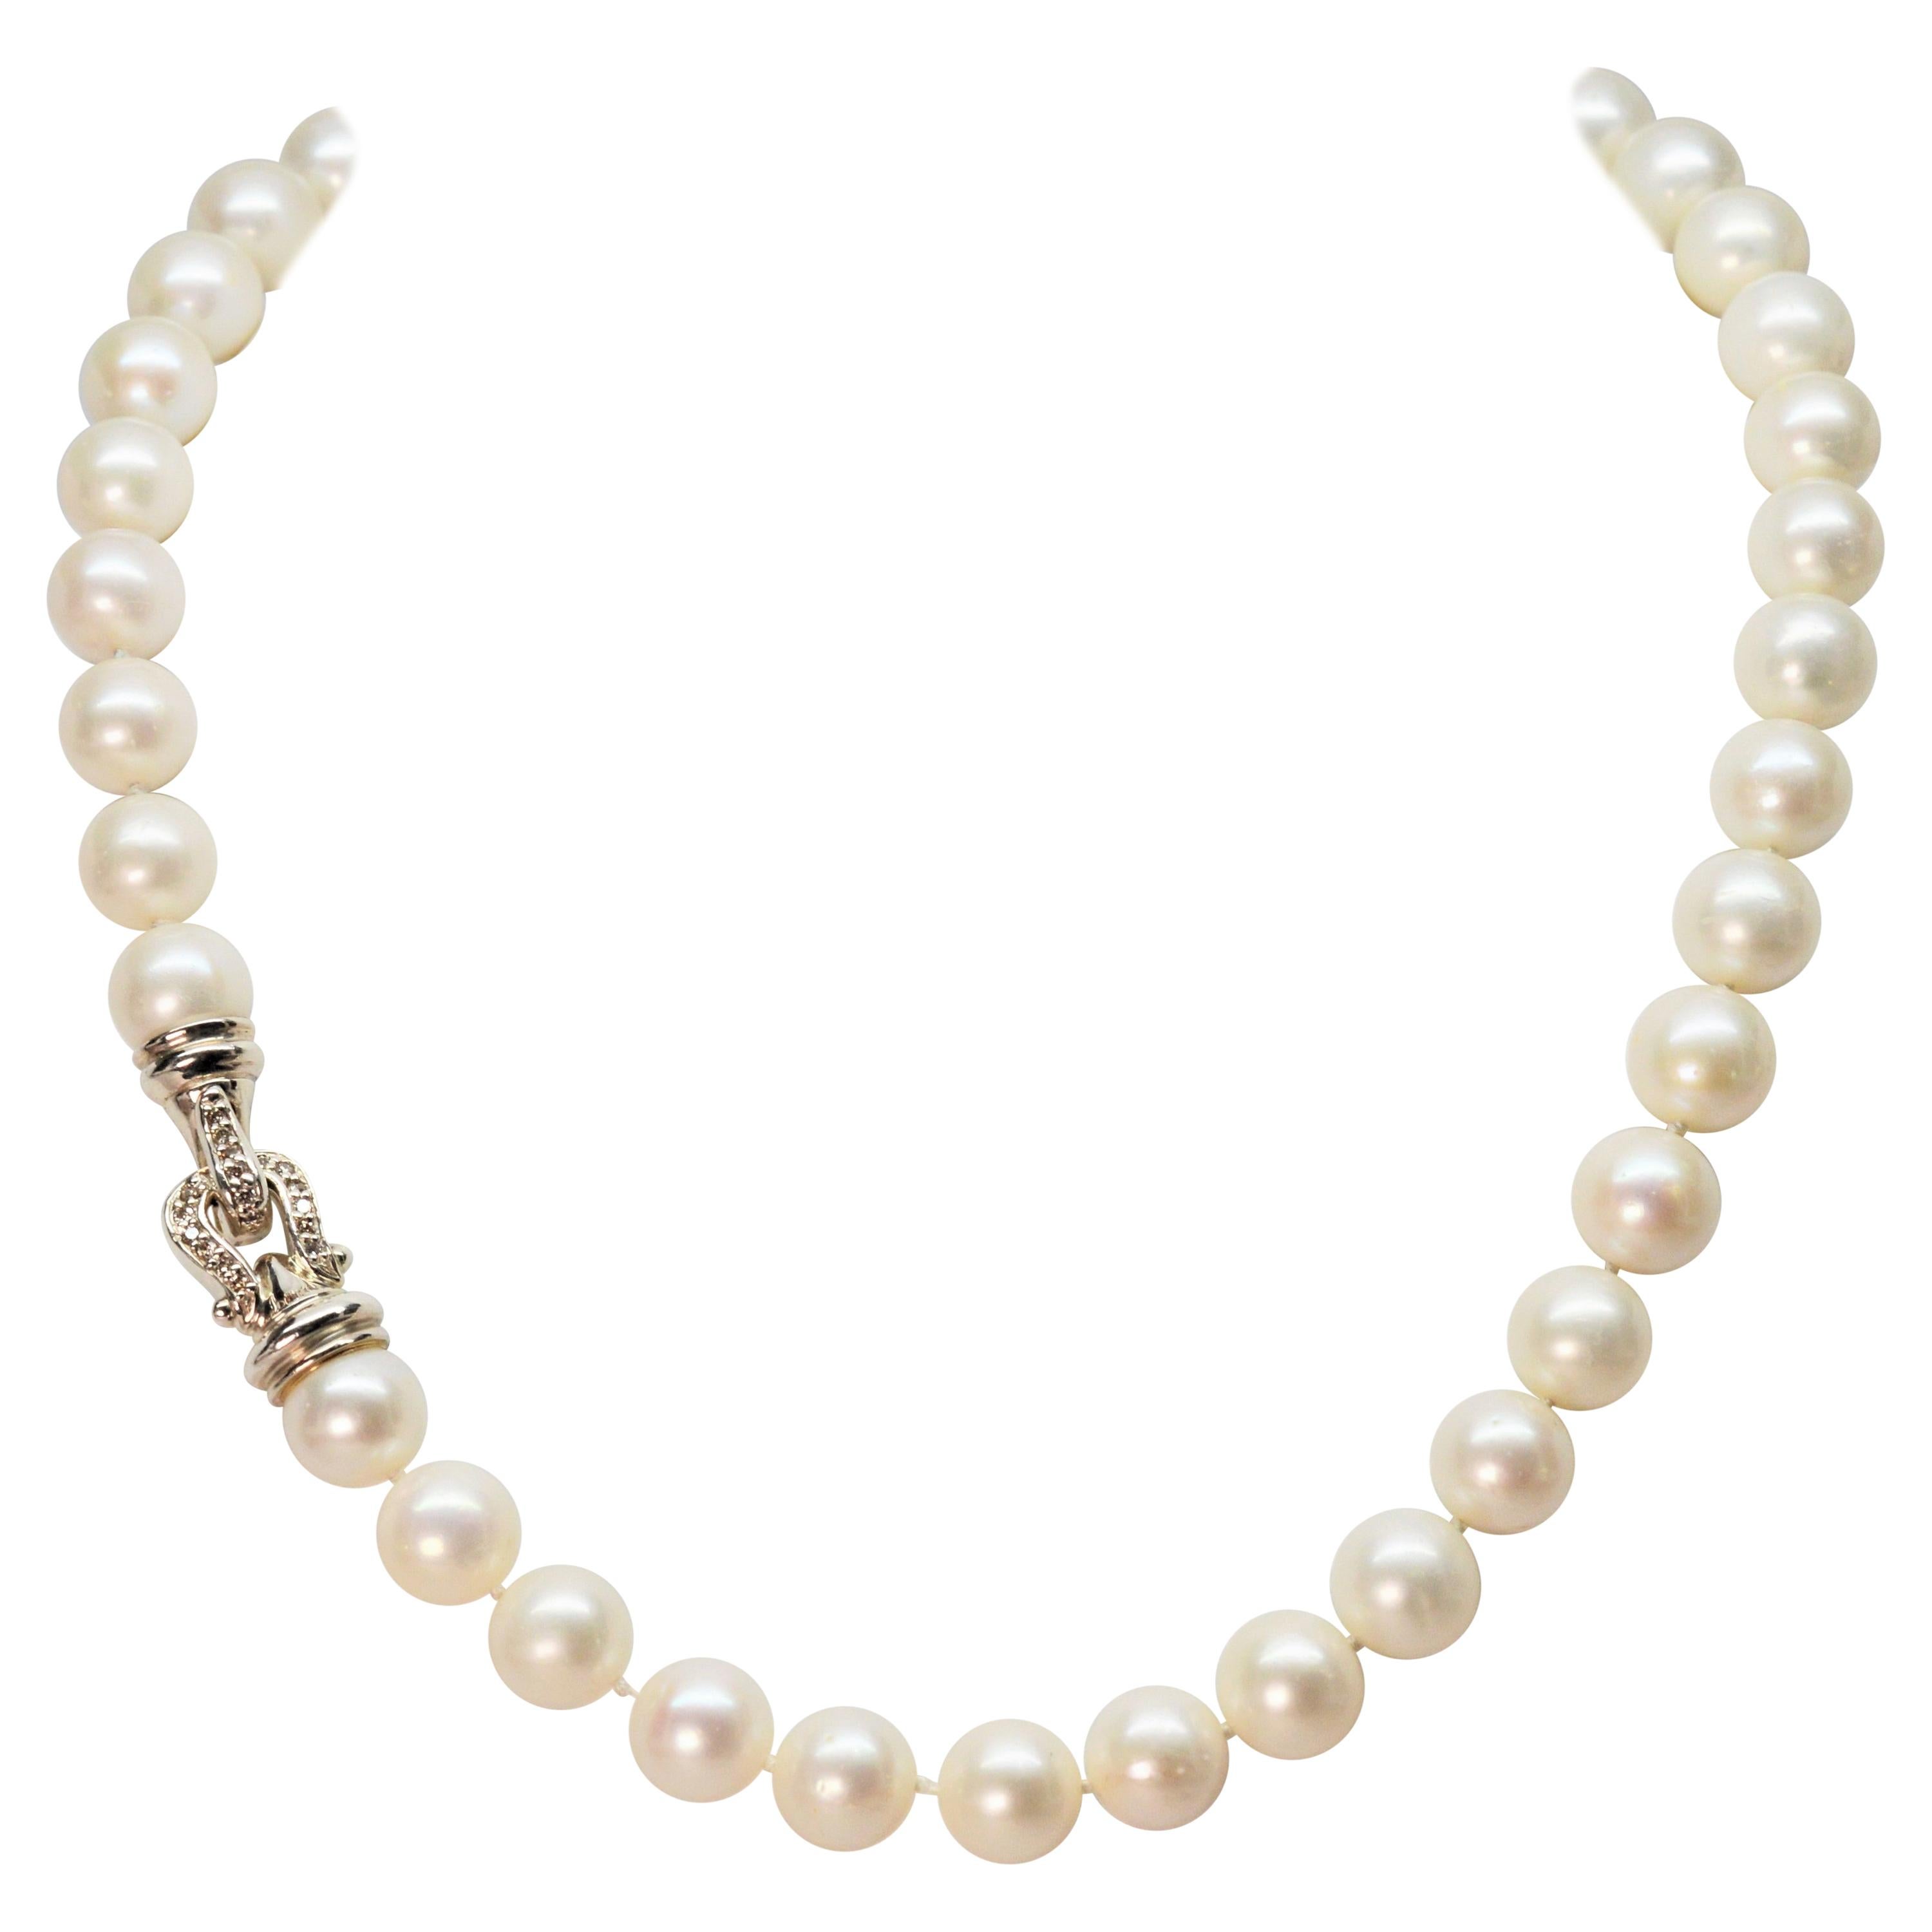 David Yurman Pearl Necklace with Diamond Accented Sterling Buckle Clasp